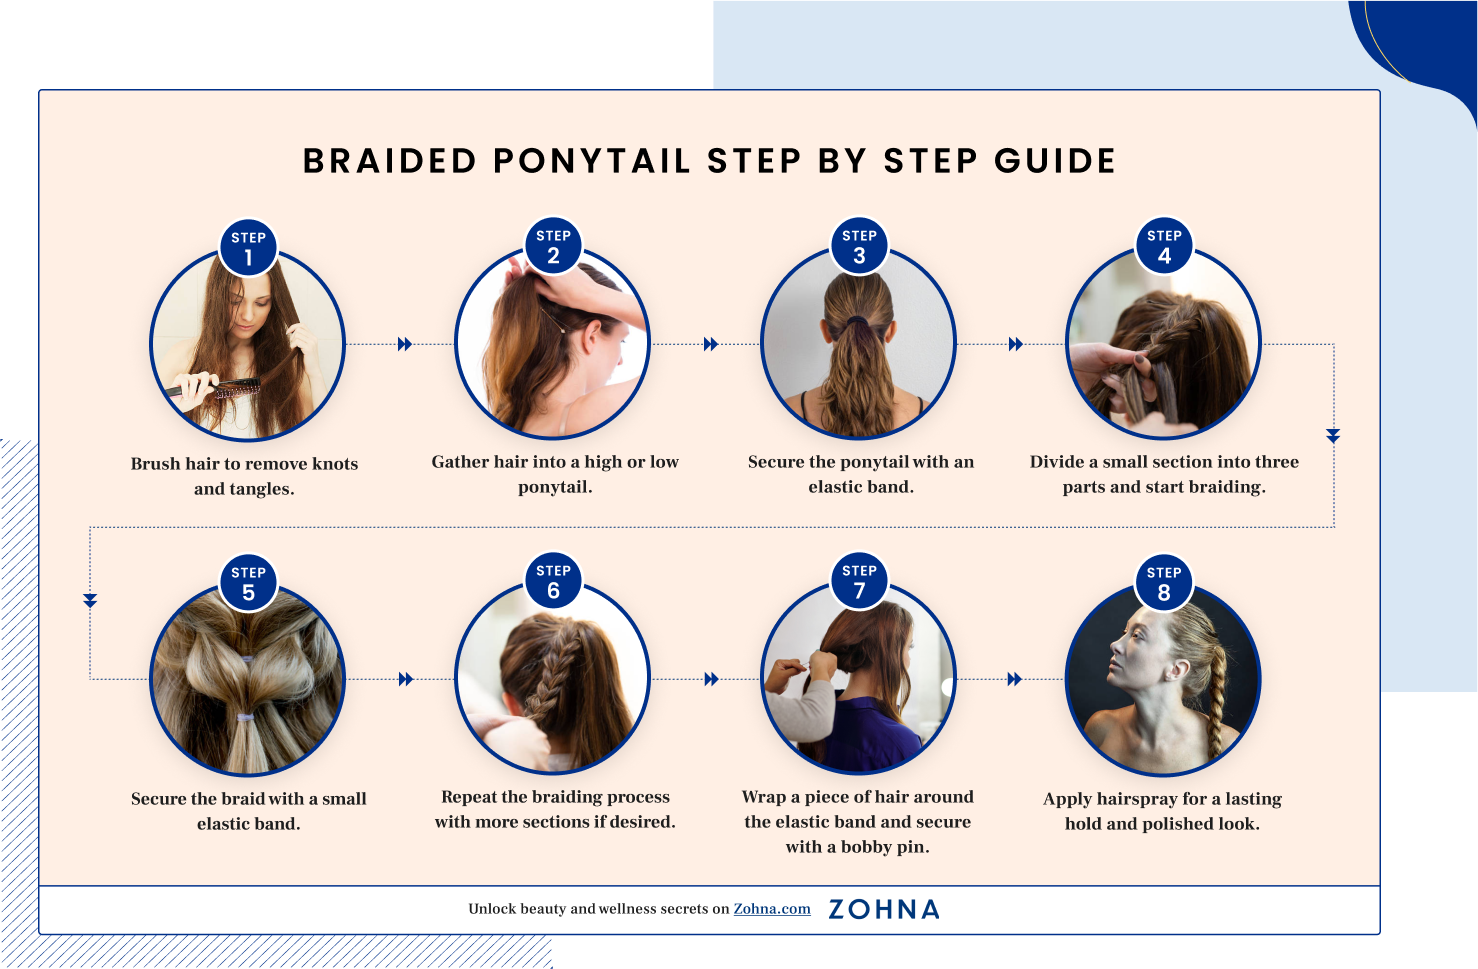 How to Do a Perfect Braided Ponytail Step by Step